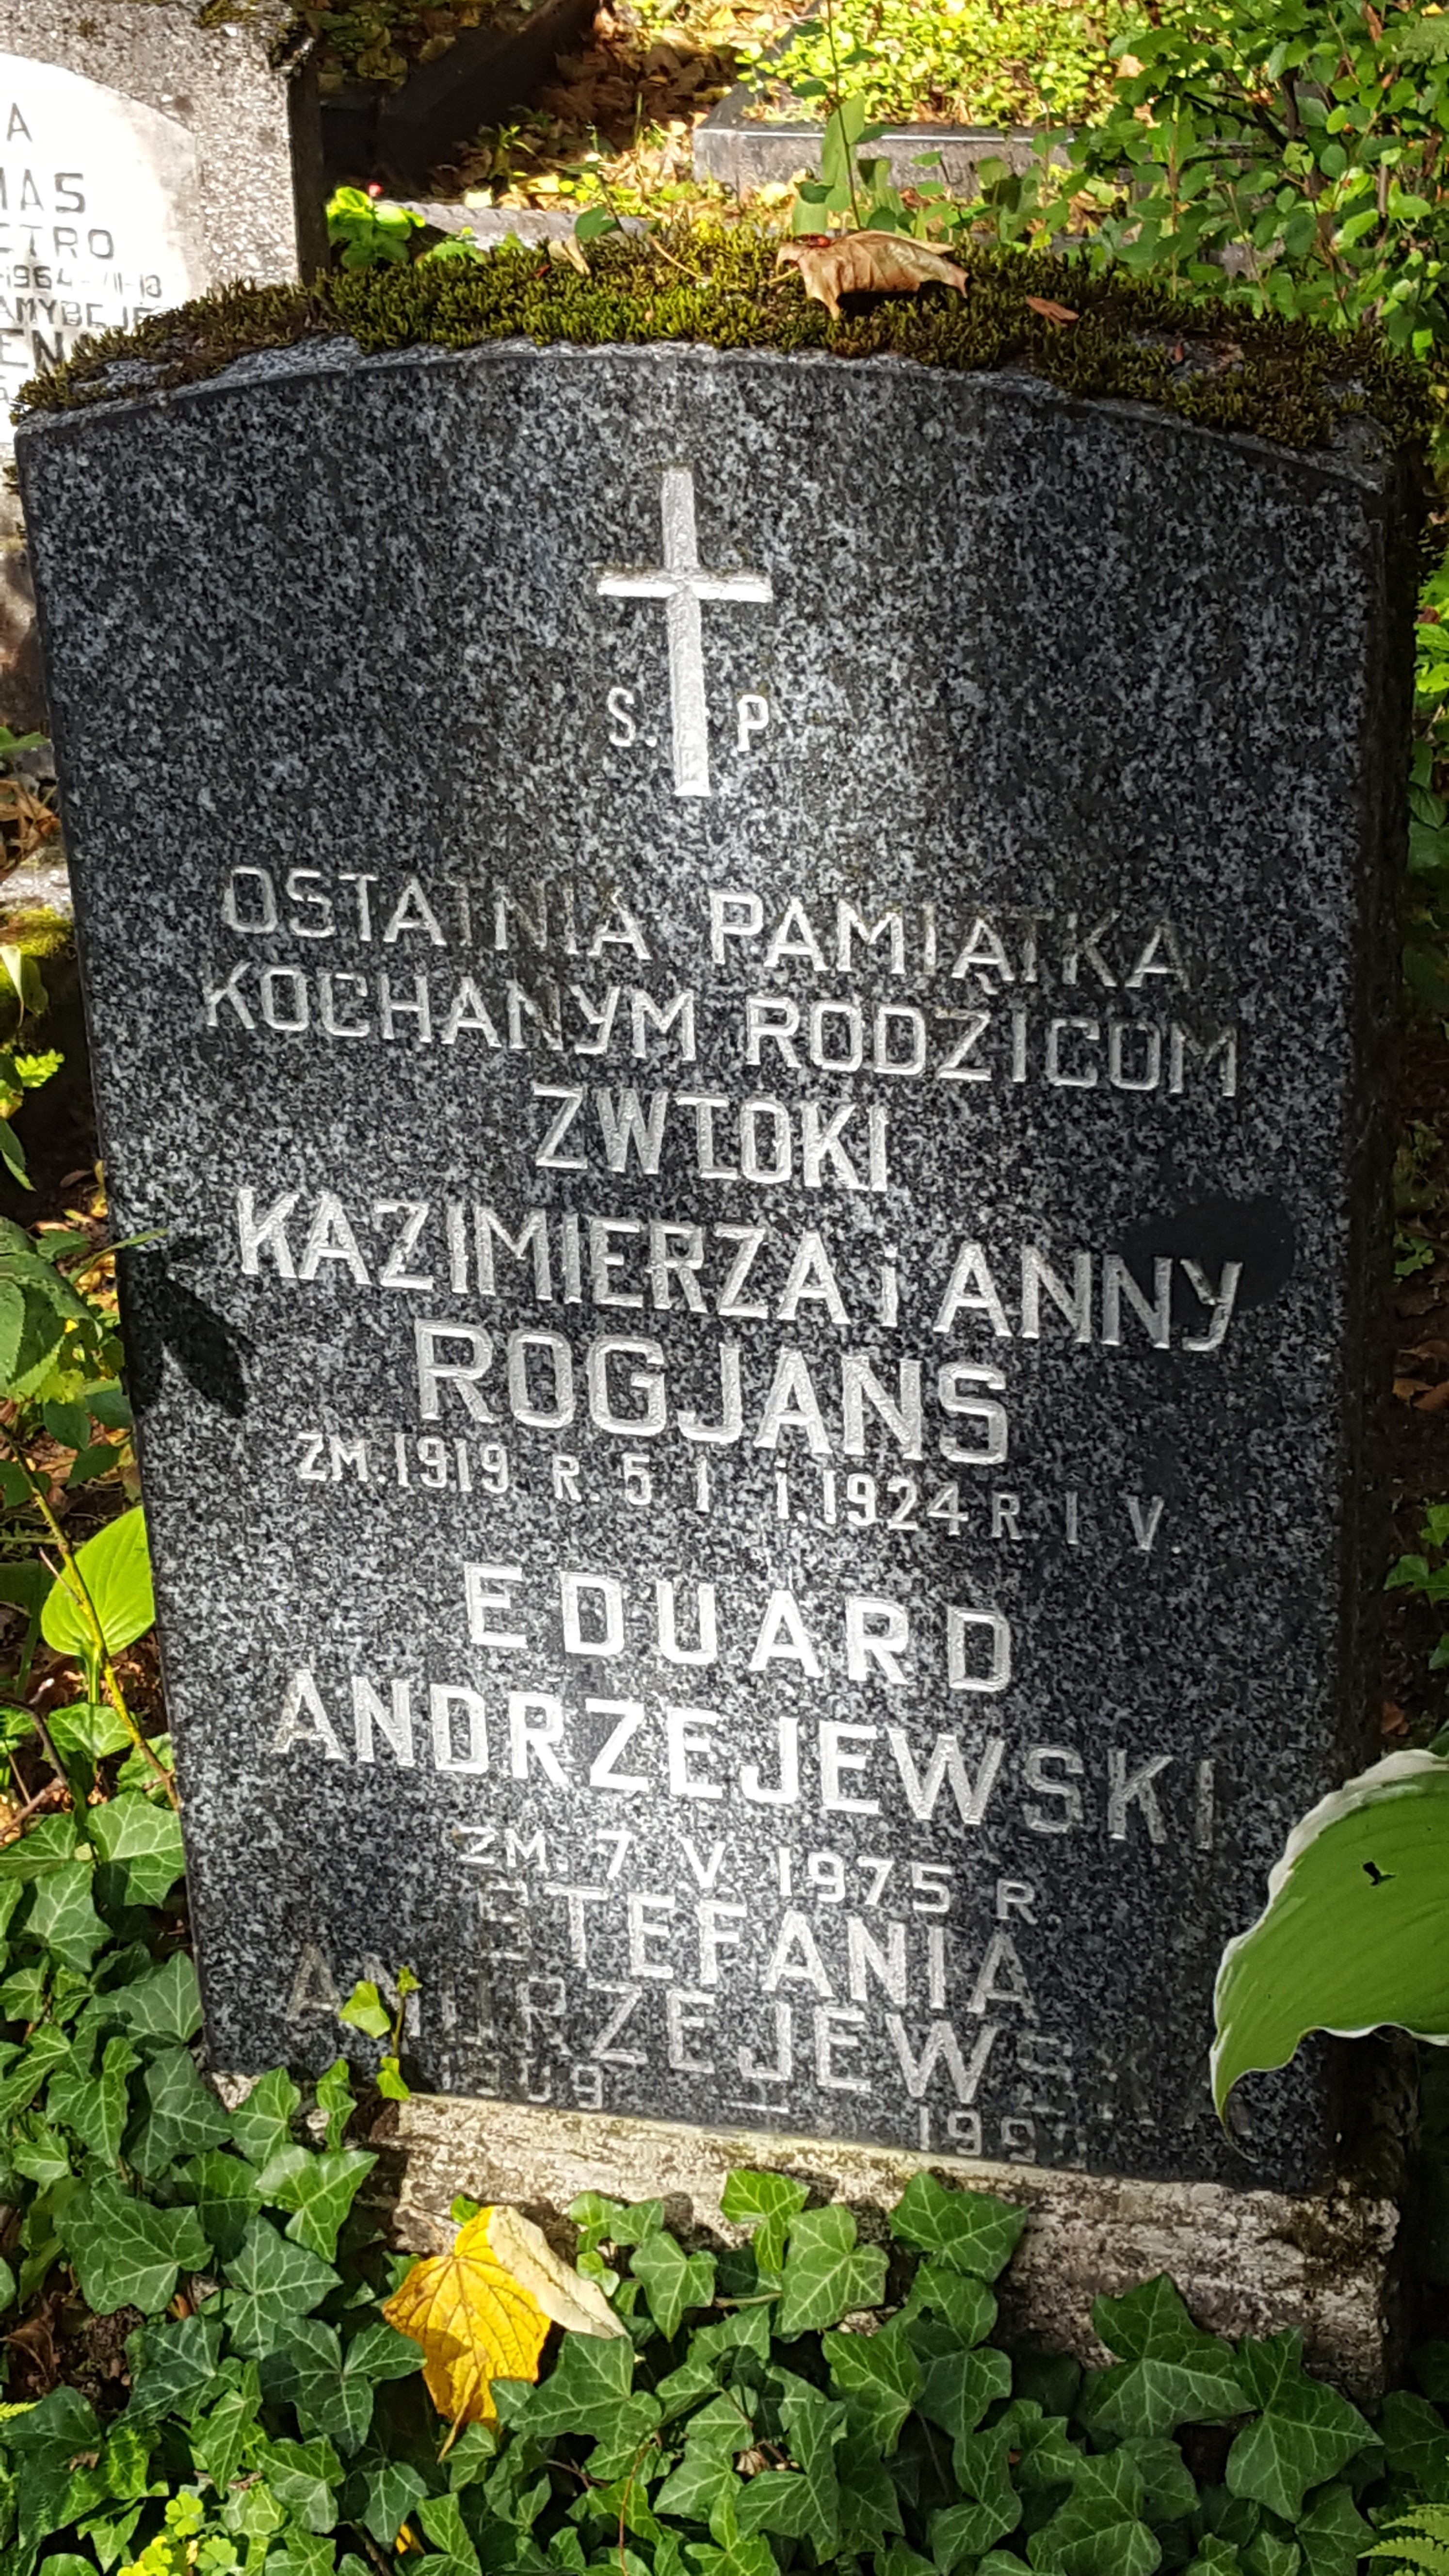 Inscription from the tombstone of the Rogjans and Andrzejewski families, St Michael's cemetery in Riga, as of 2021.